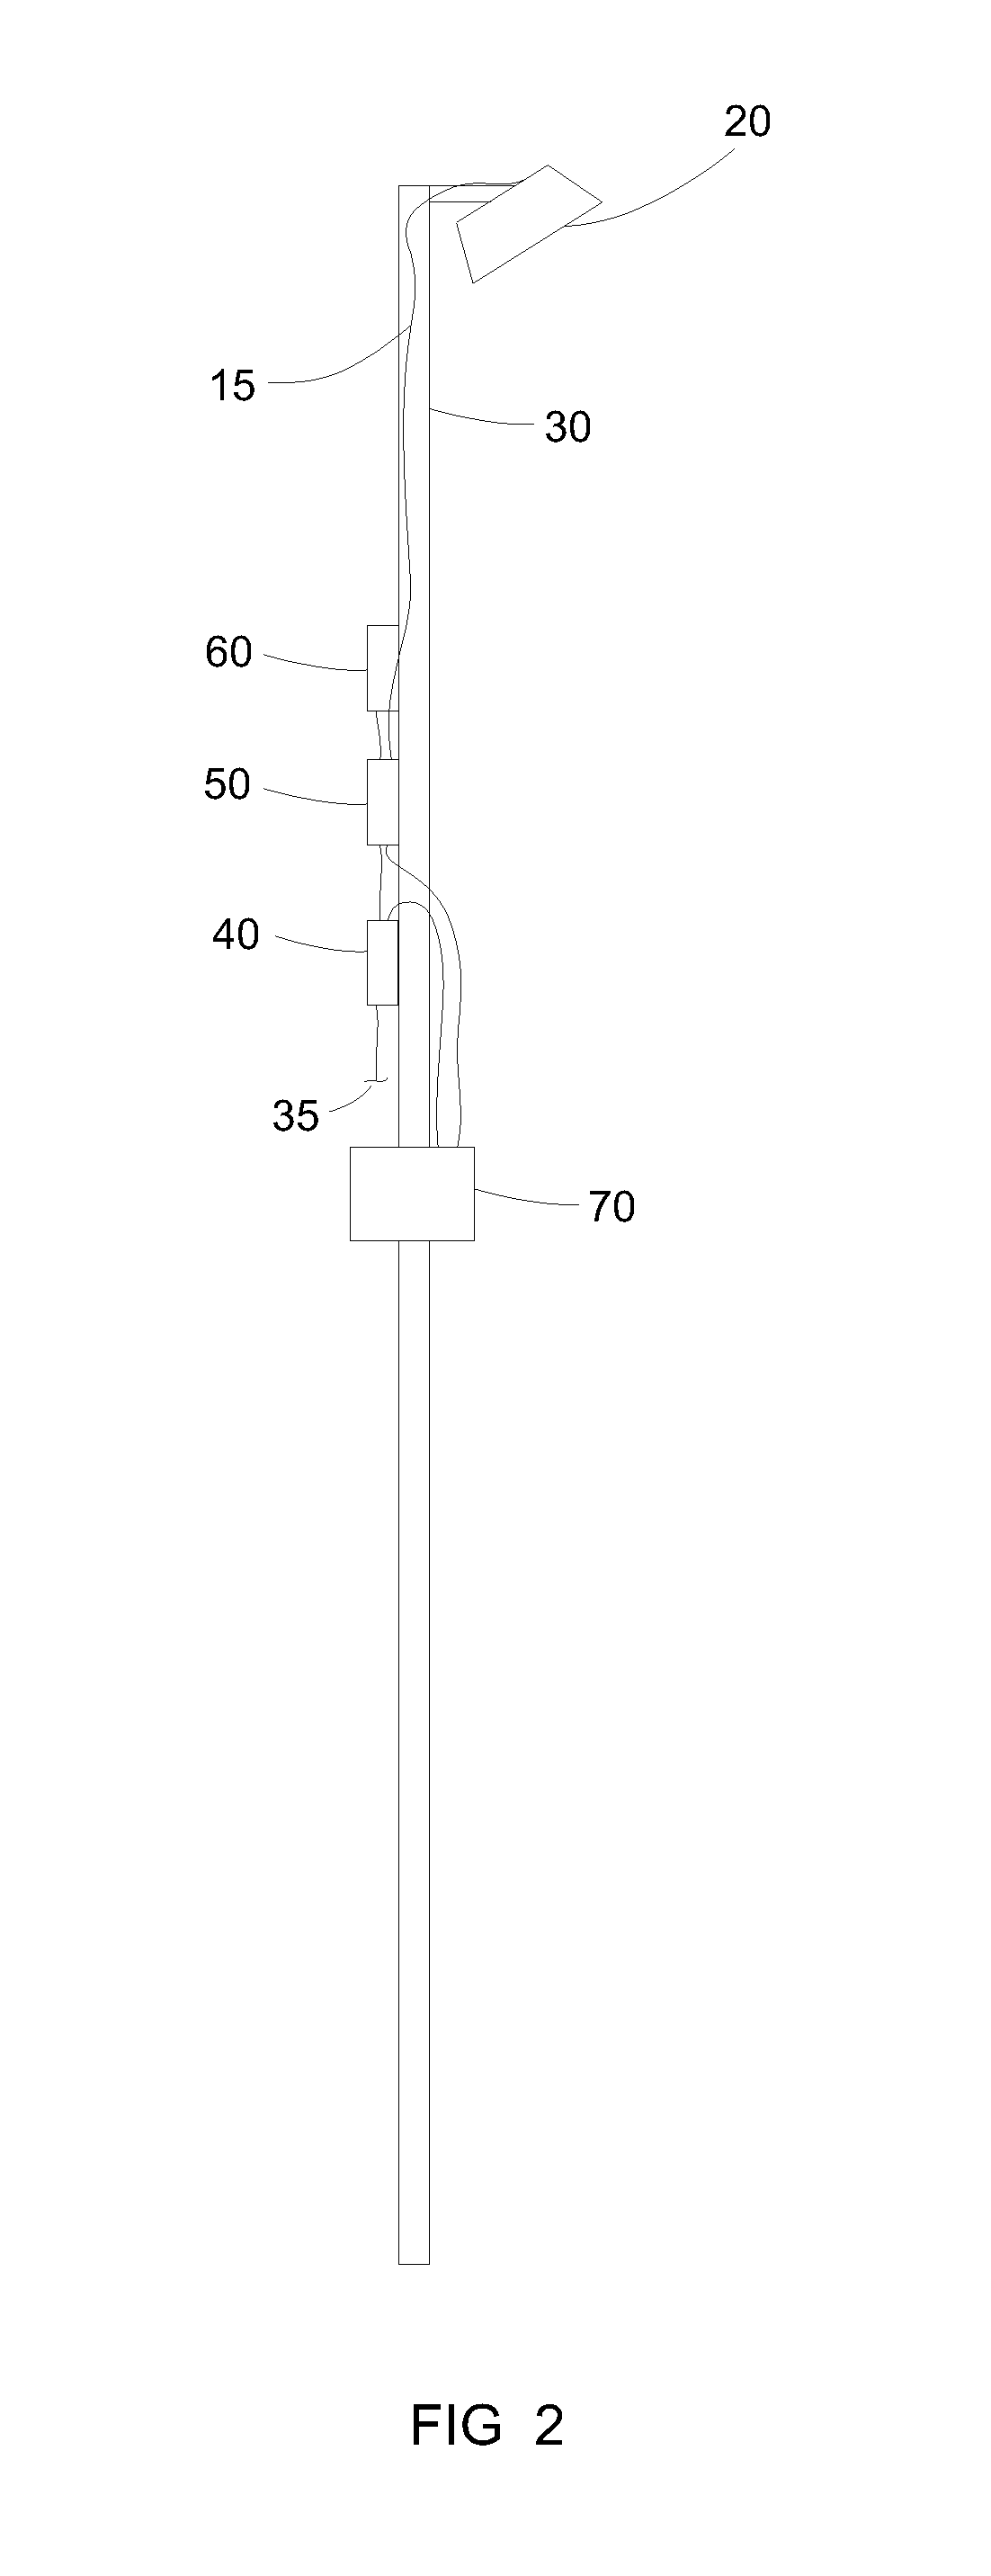 Apparatus, method, and system for event and backup lighting